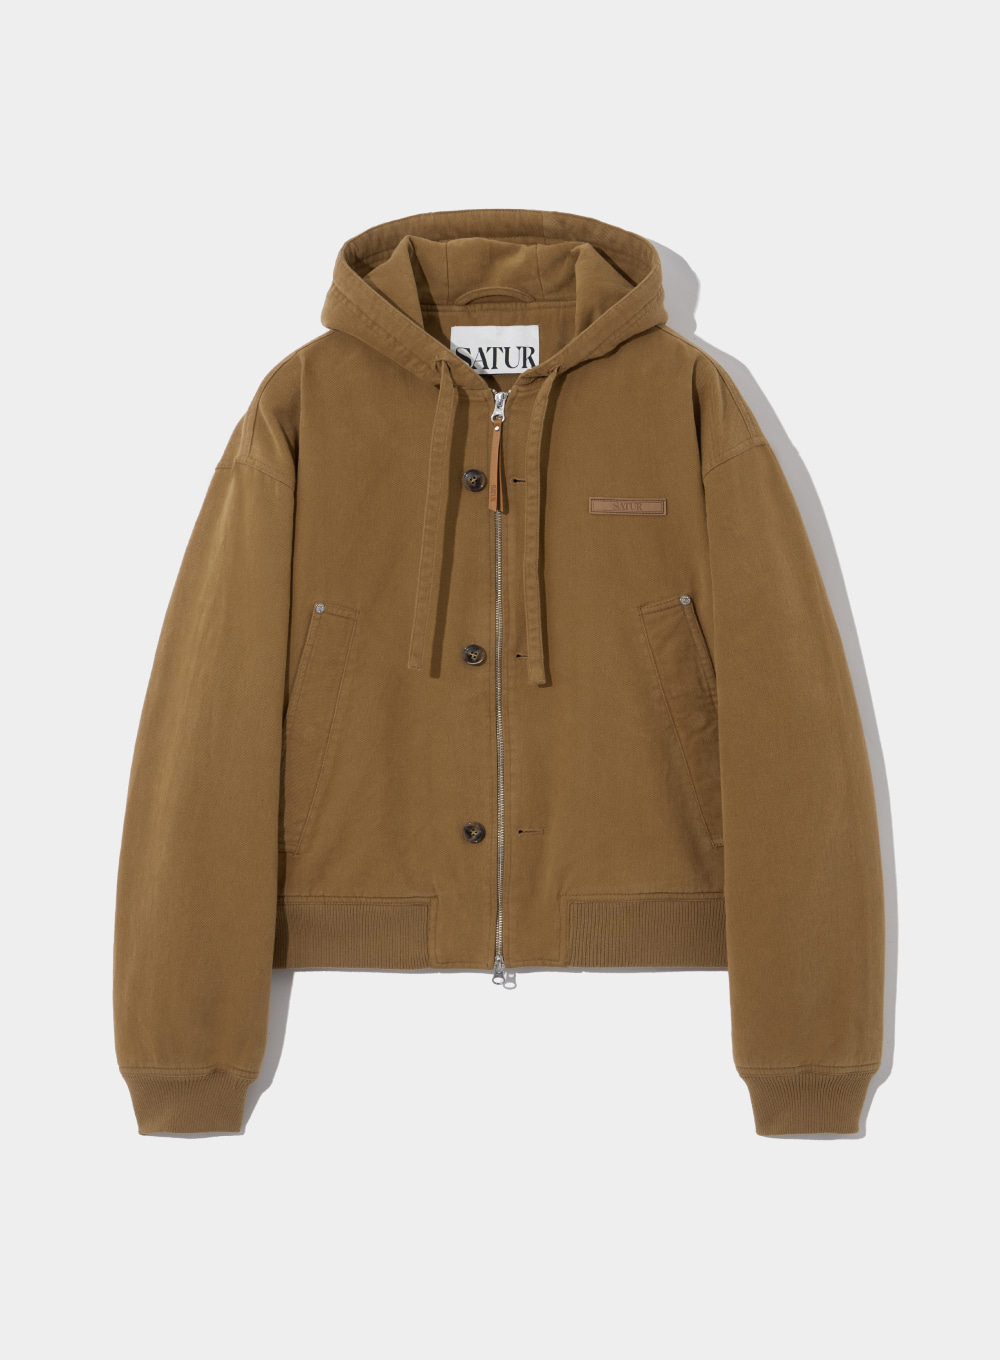 Teo Padded Hooded Zip-Up - Camel Brown